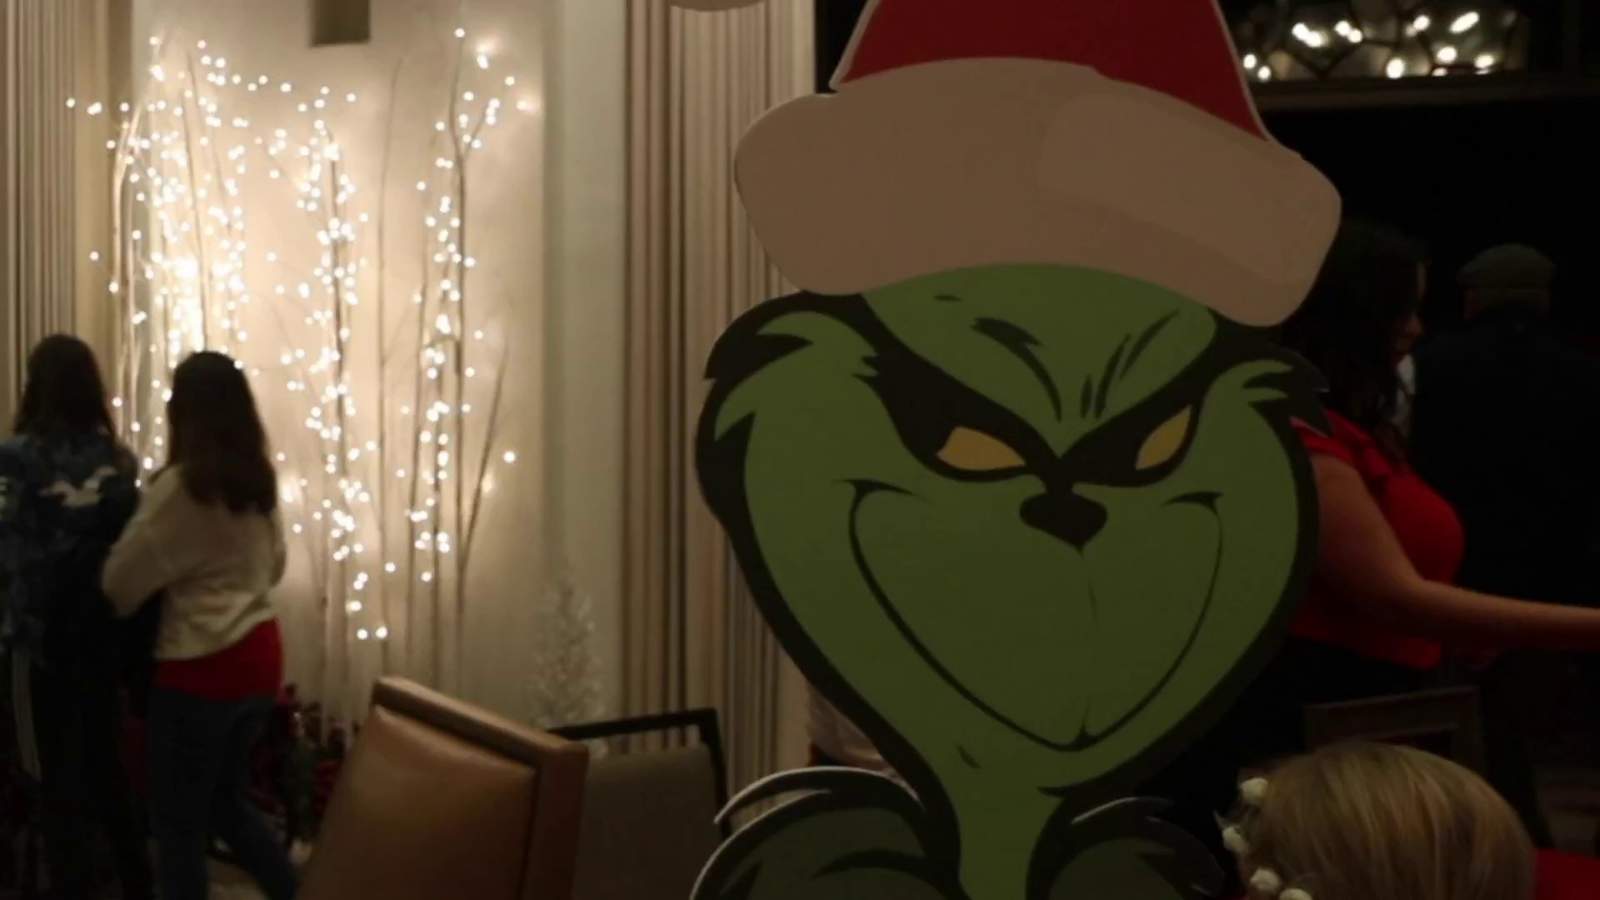 WATCH: Get brunch with the Grinch!